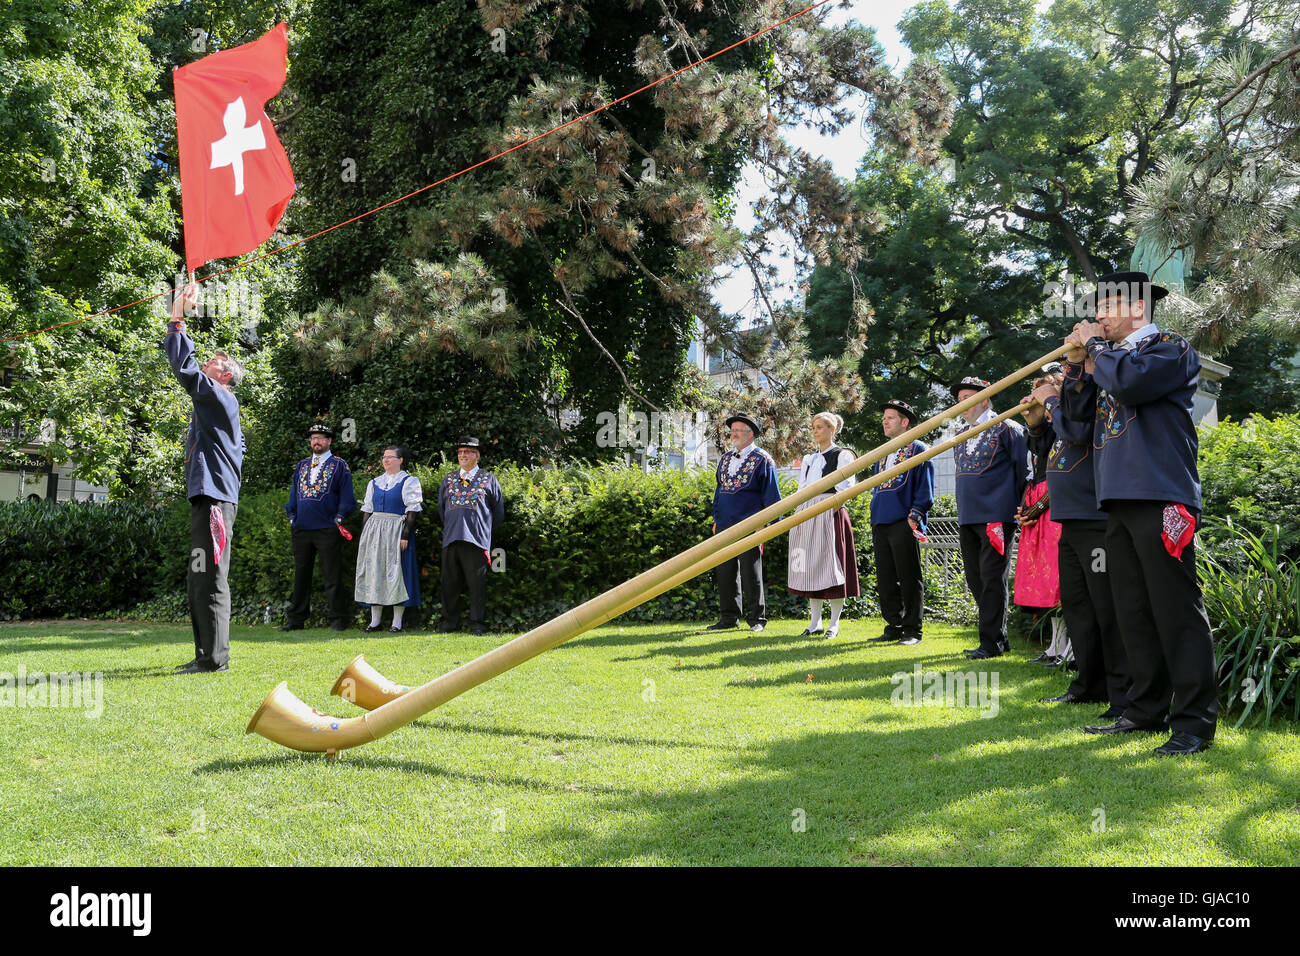 Members of the Trachtenvereinigung, two AlphornBlasers and a Fahnenschwinger perform in Zurich on Swiss National Day. Stock Photo